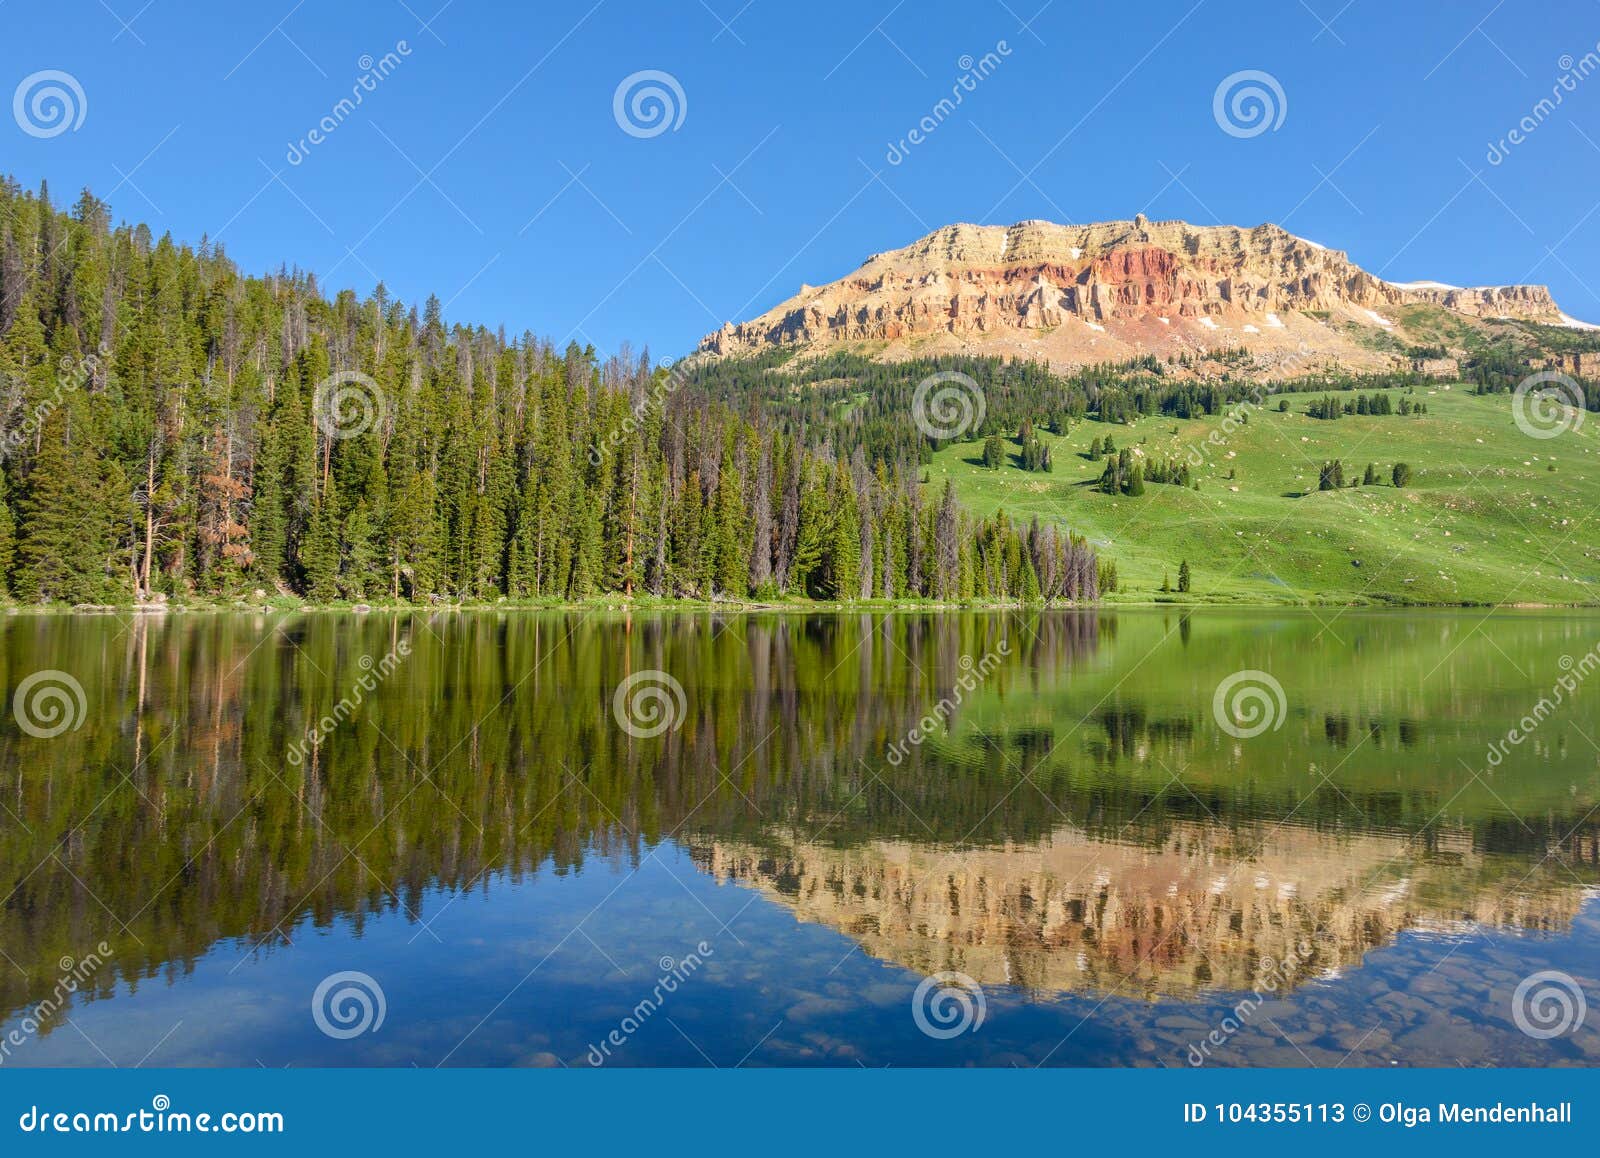 beartooth butte mountain and bear lake in yellowstone park, usa